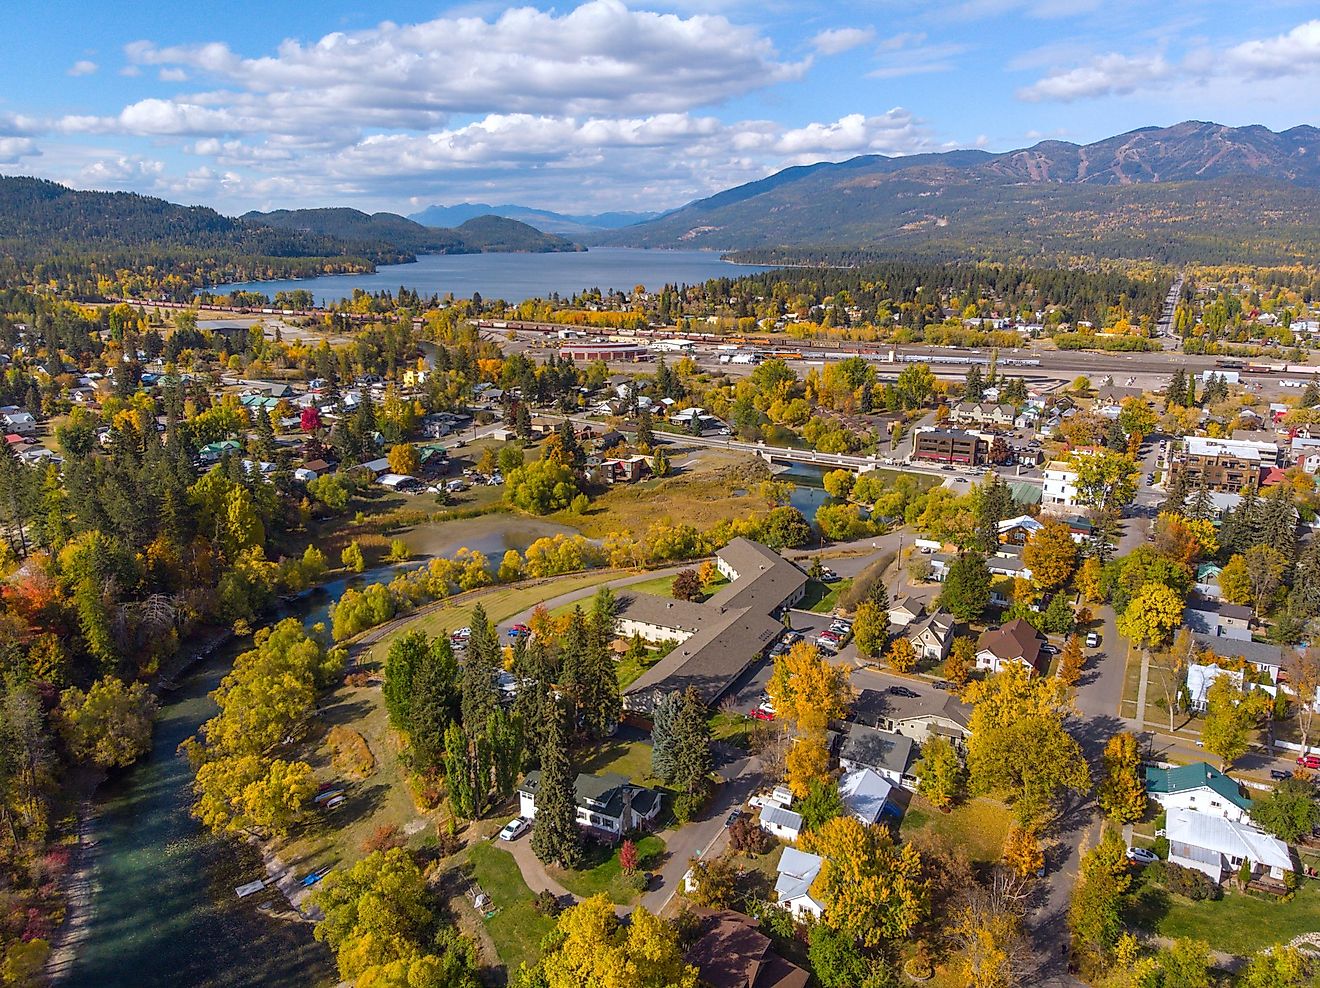 Aerial view of the beautiful town of Whitefish, Montana.